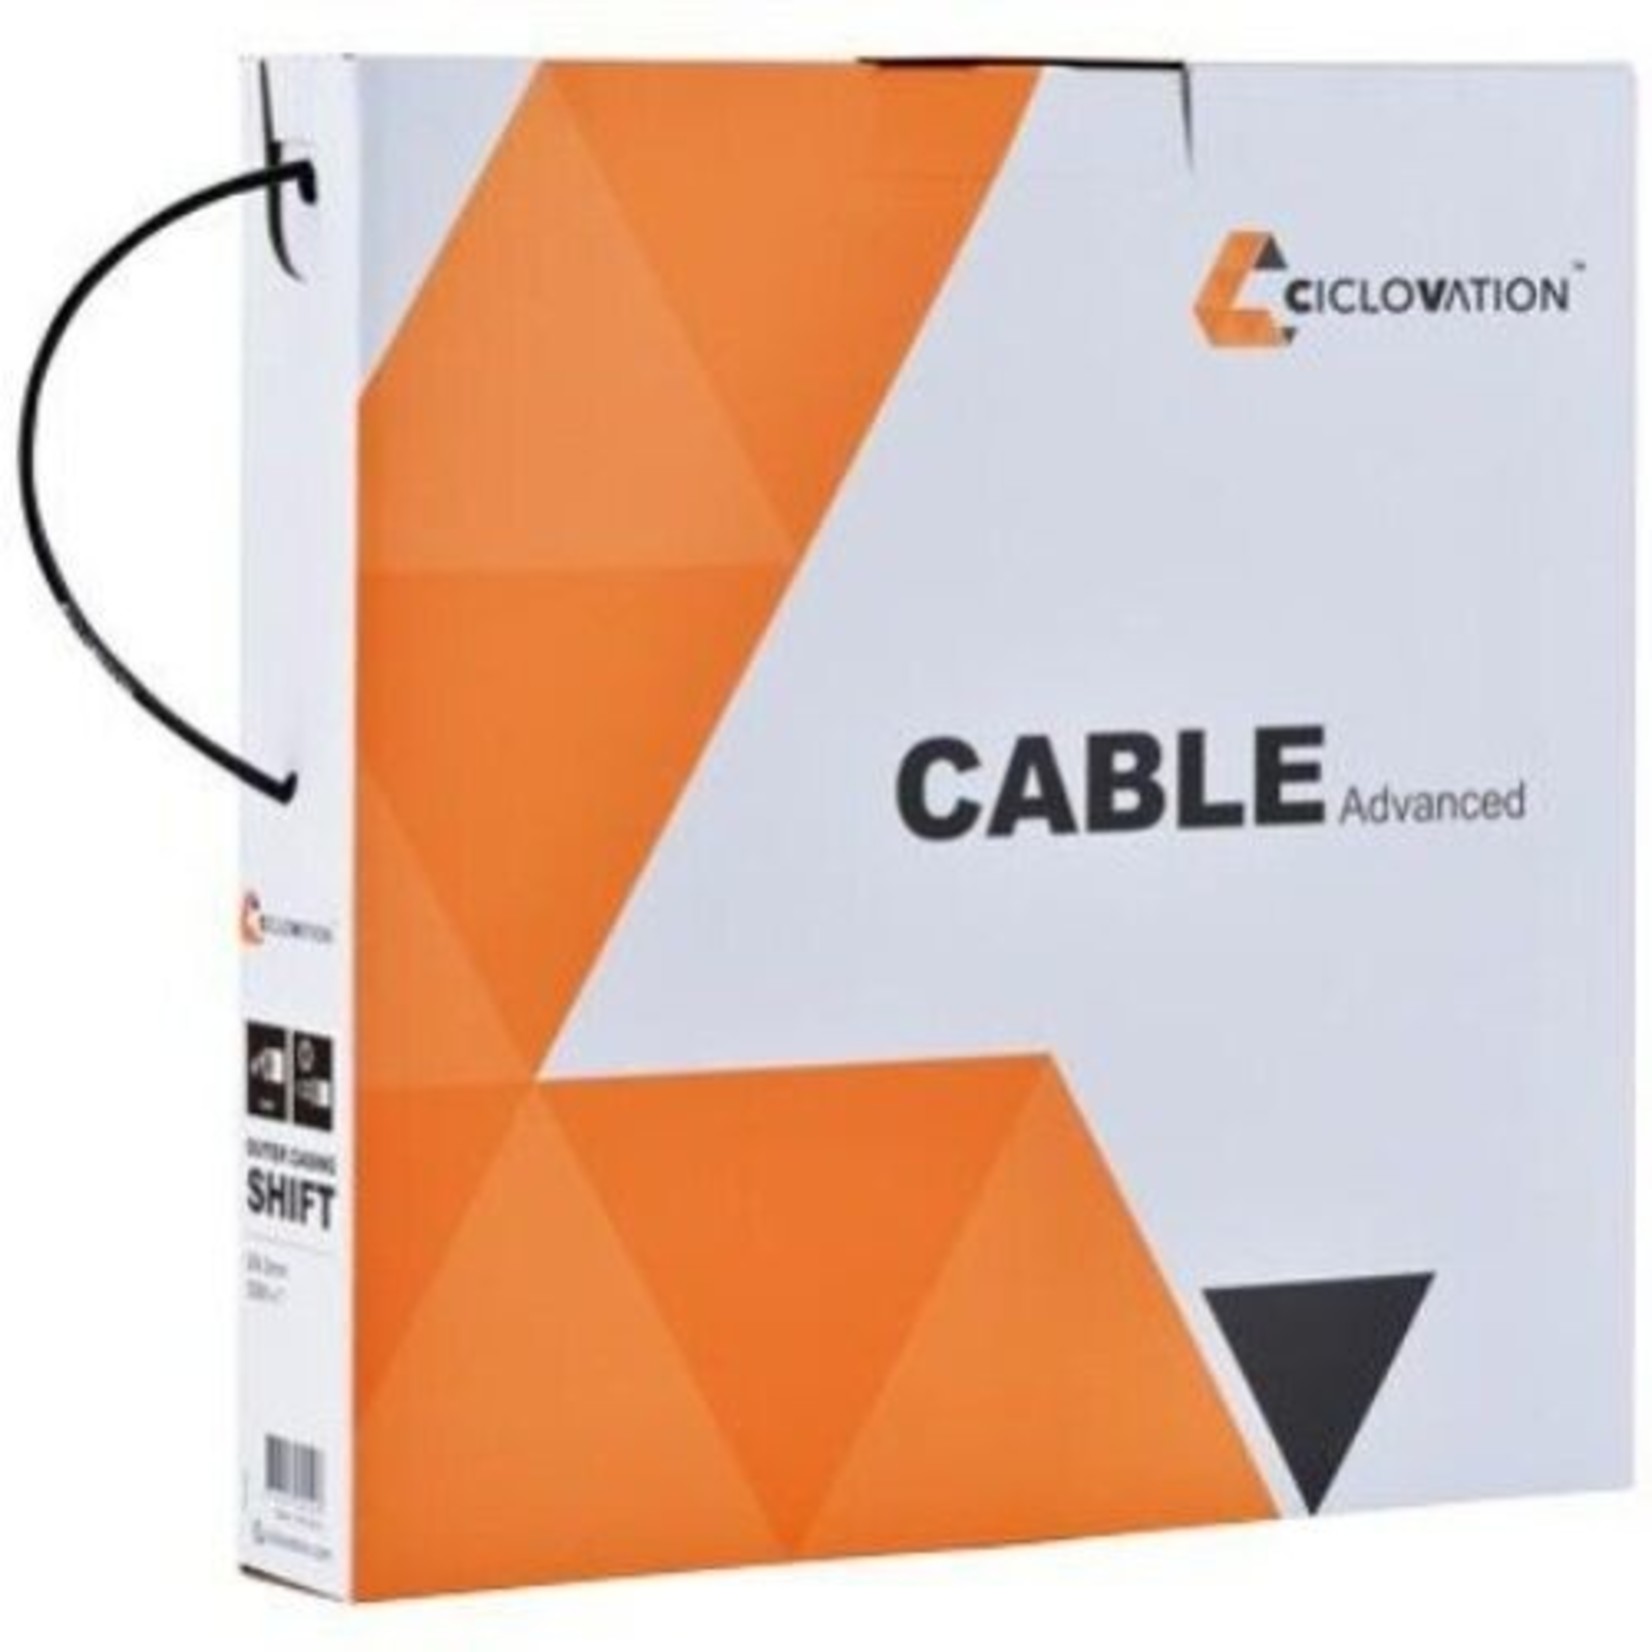 Ciclovation Ciclovation Shifter Cable Housing Advanced OSL-lube 50m